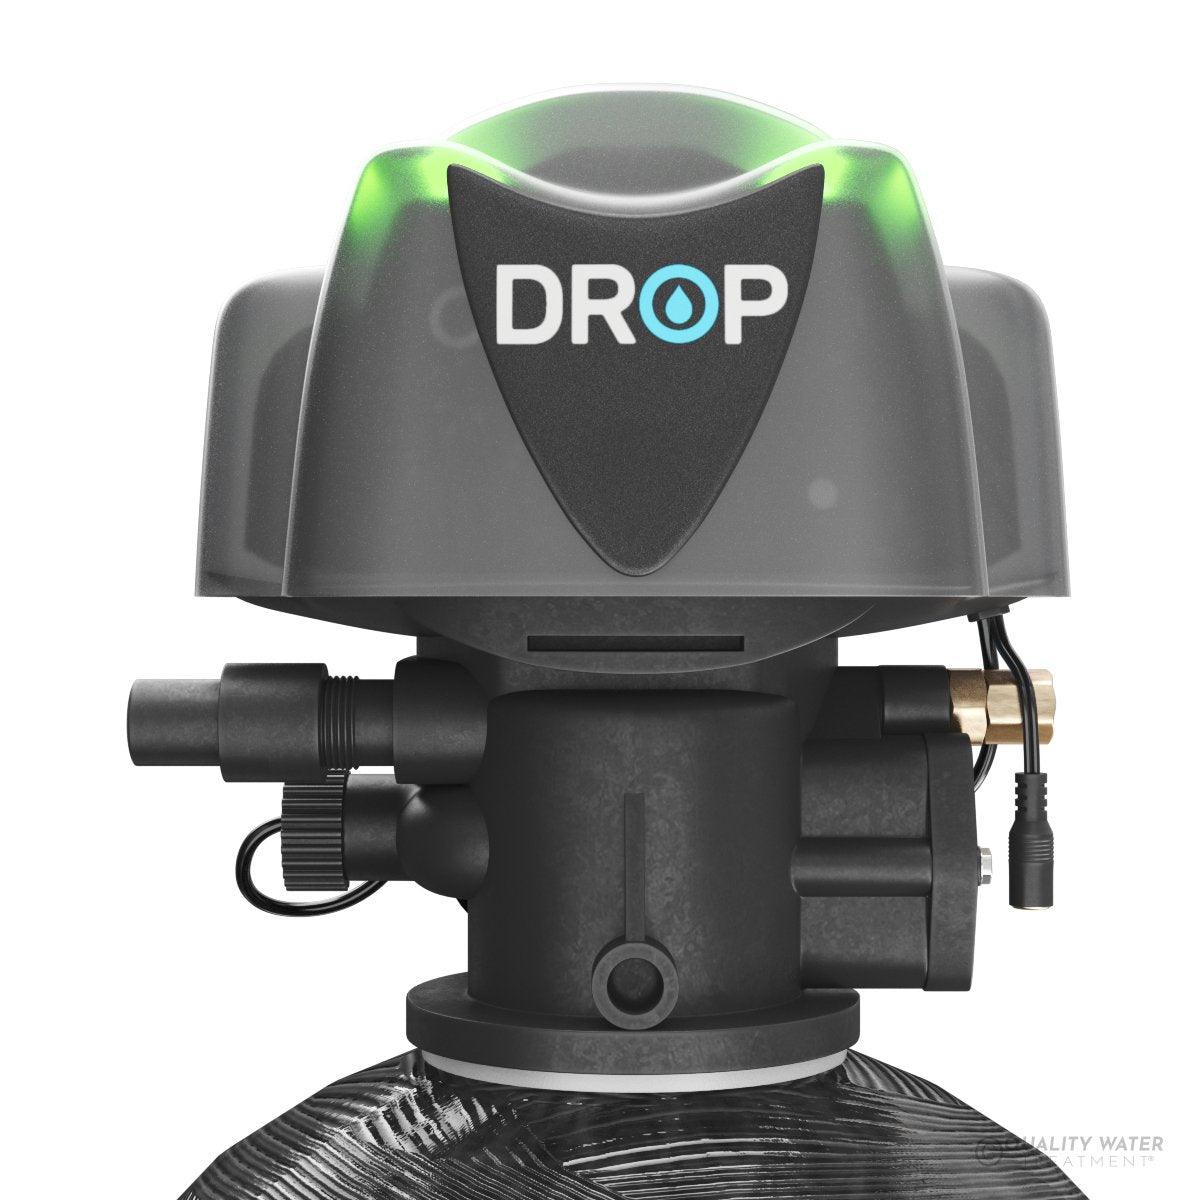 SoftPro® Smart Home+ Softener System with DROP® Technology - Quality Water Treatment